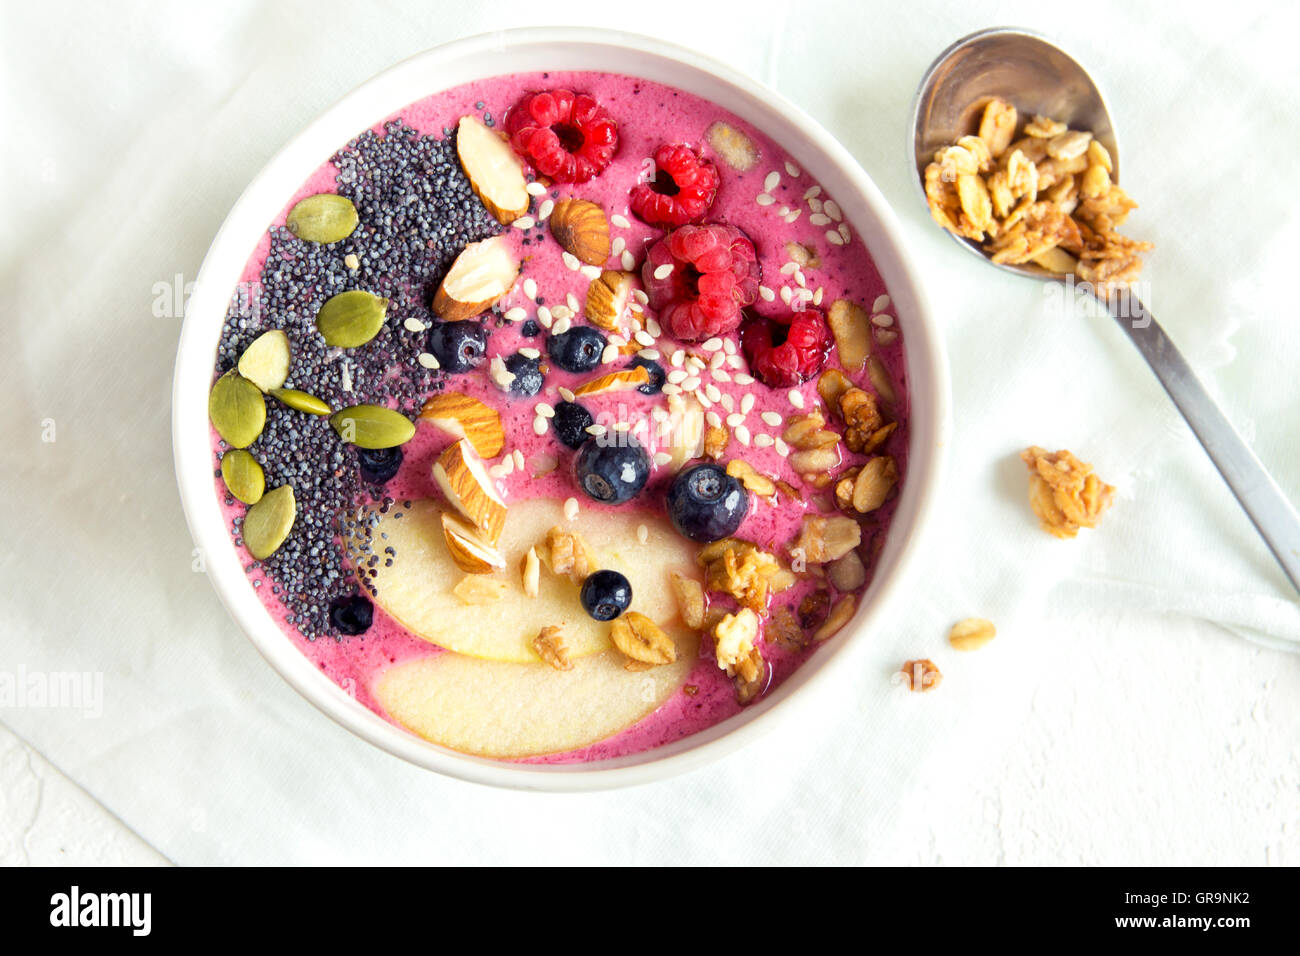 Smoothie bowl with fresh berries, nuts, seeds and homemade granola for healthy breakfast Stock Photo